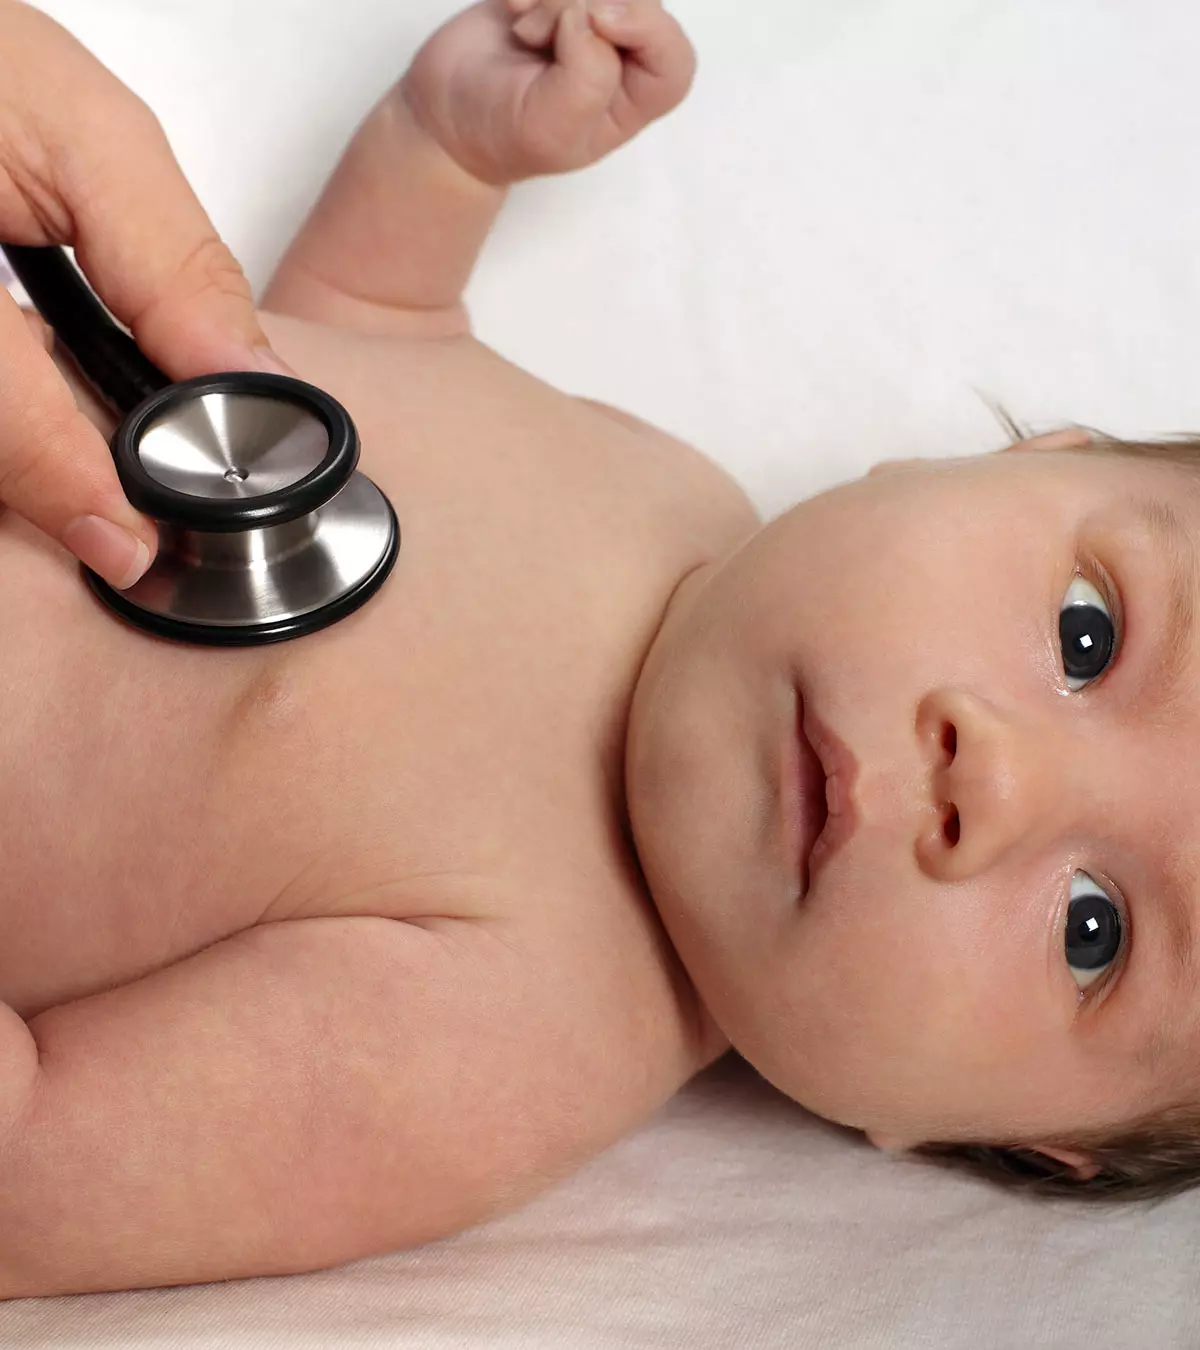 15 Common Infant And NewbornProblems You Should BeAware Of